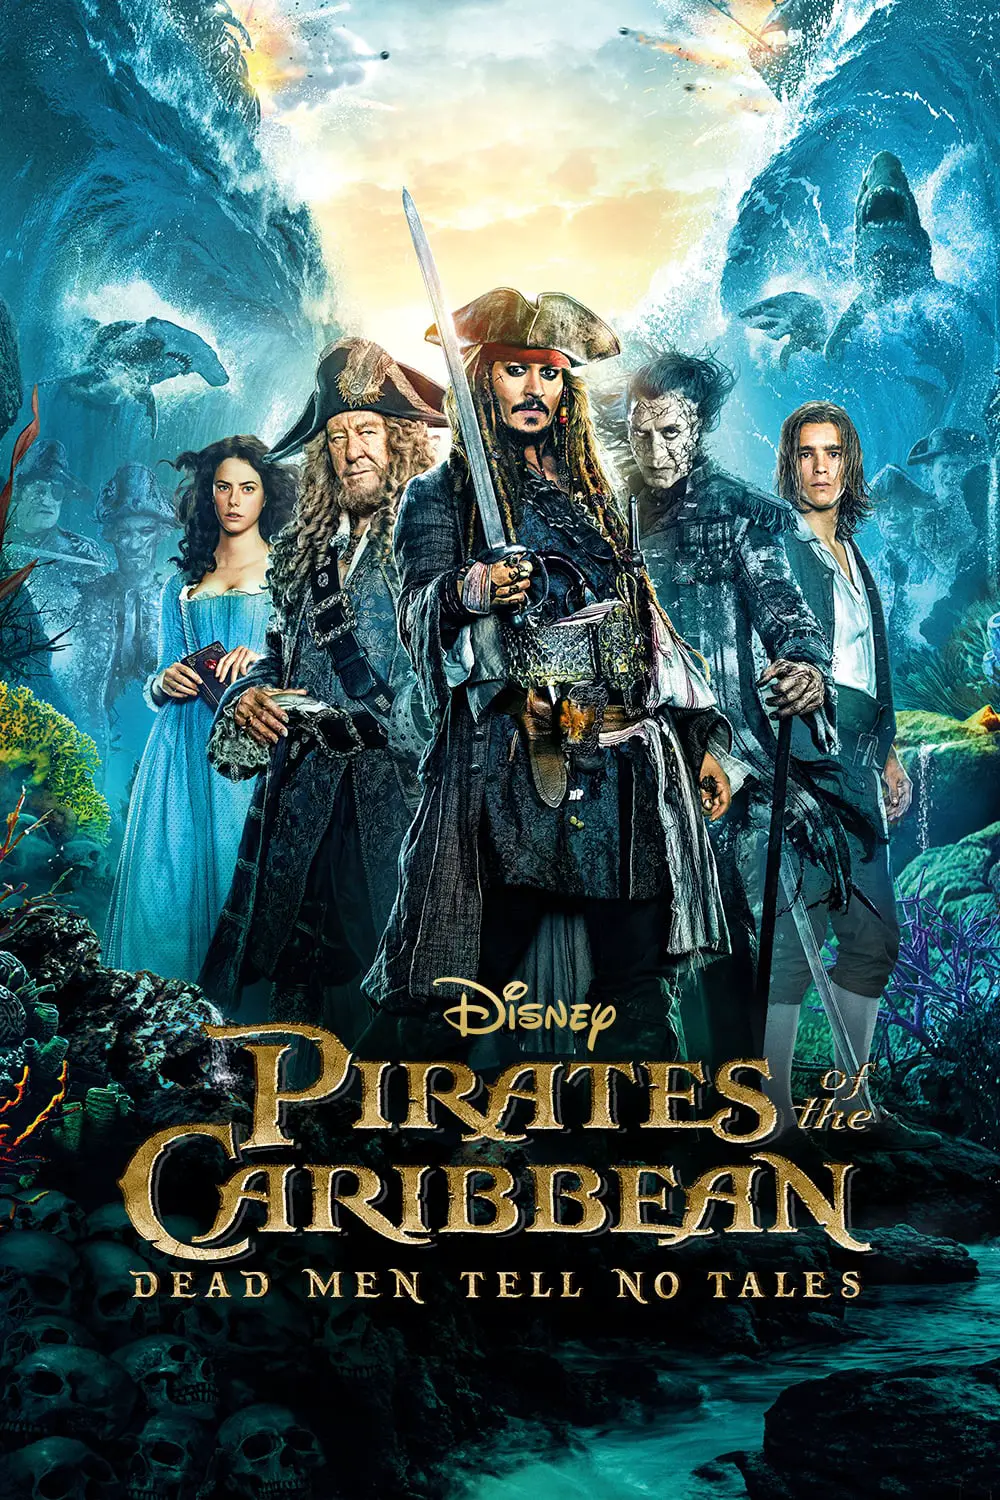 You are currently viewing Pirates of the Caribbean: Dead Men Tell No Tales